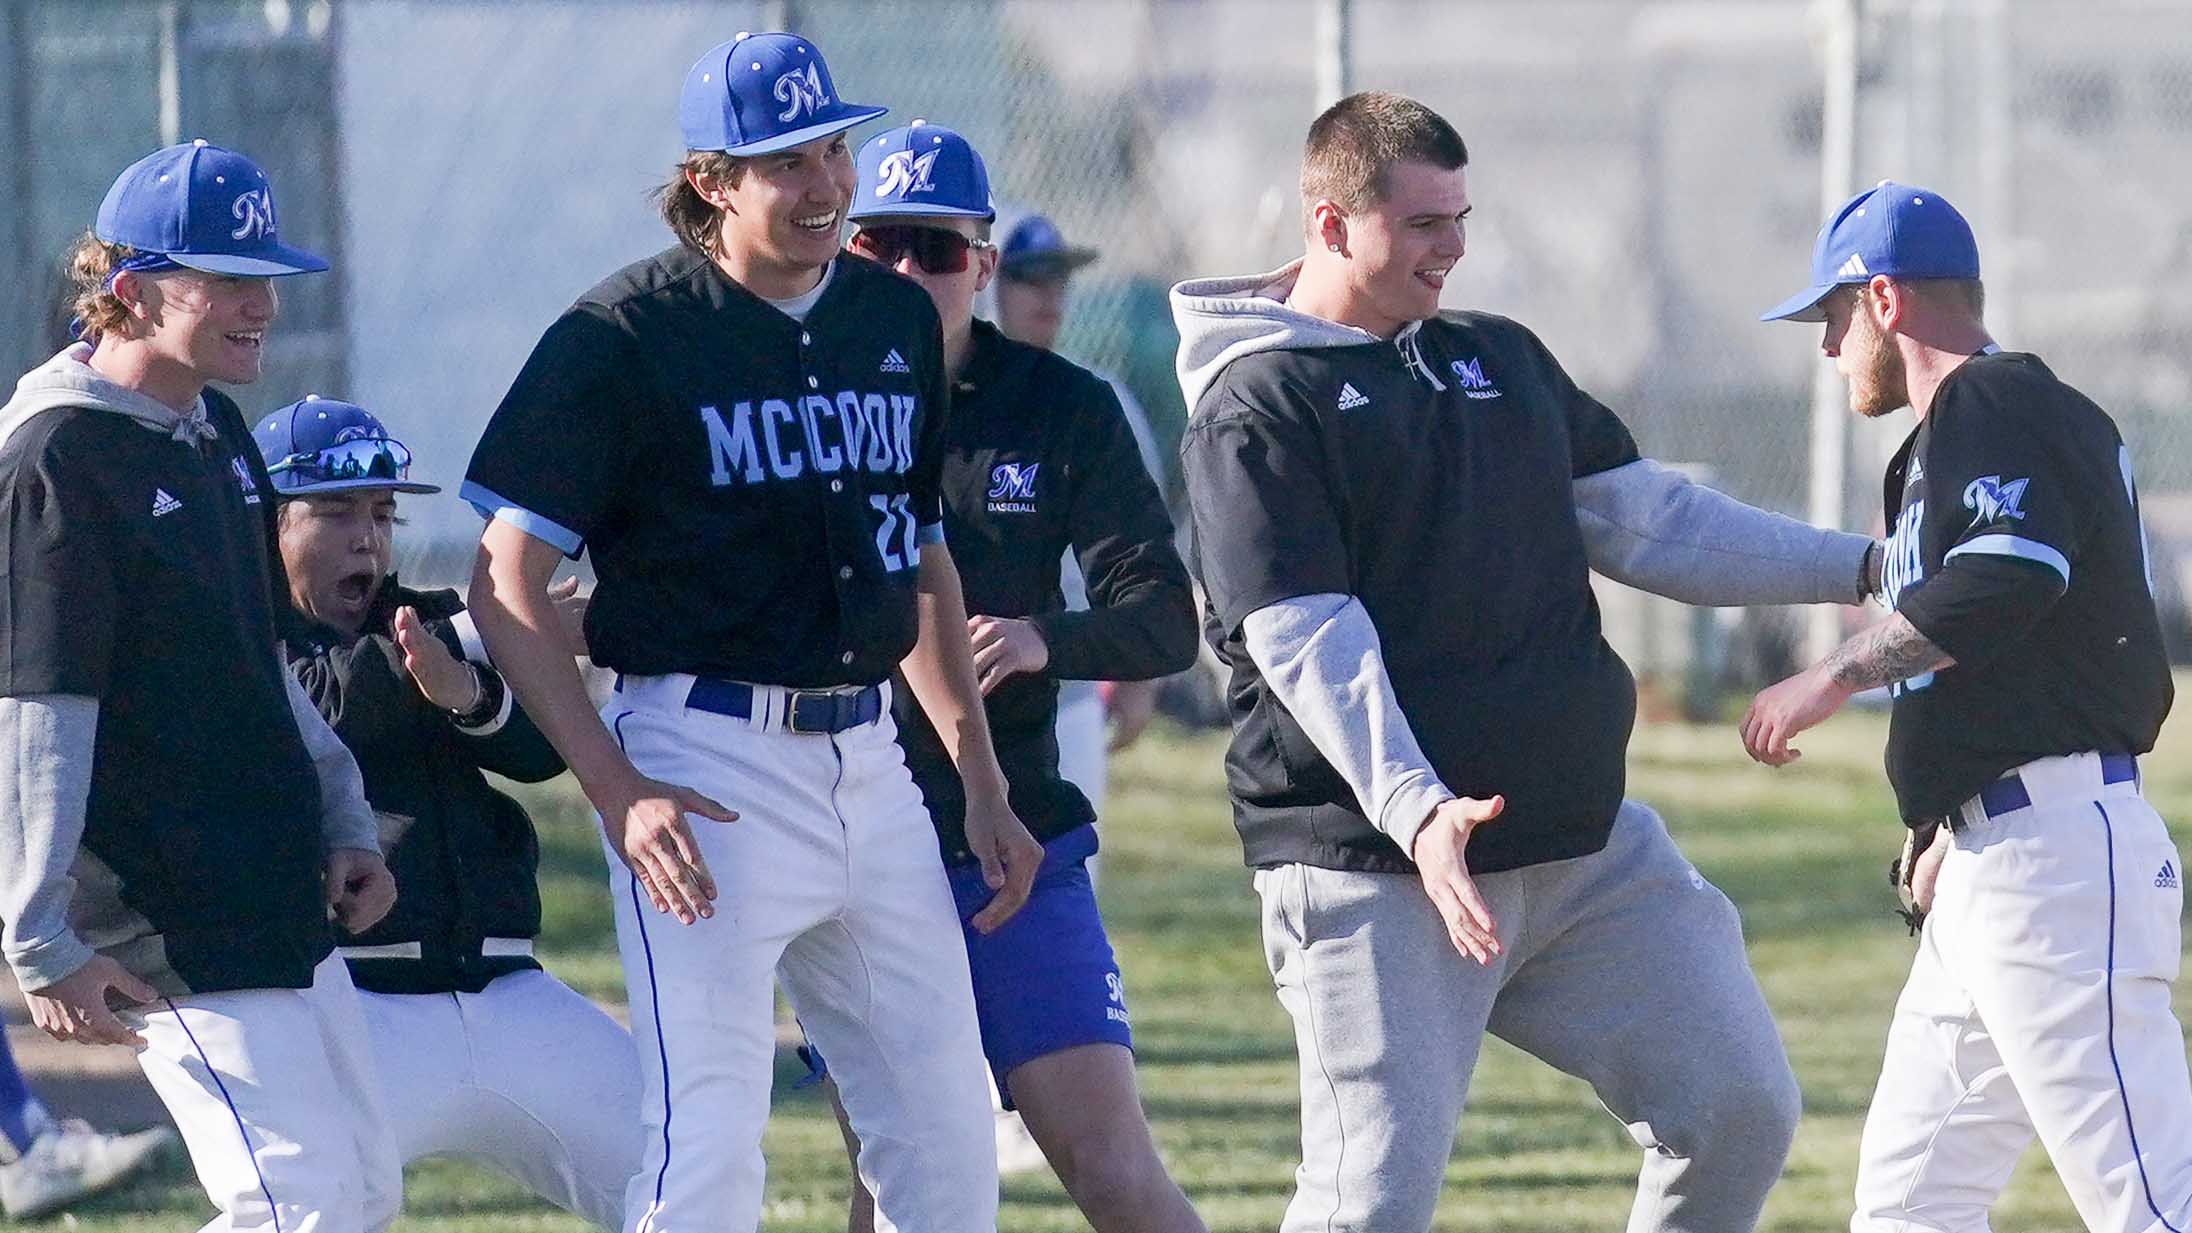 MCC Baseball faces NJC in opening round of tournament